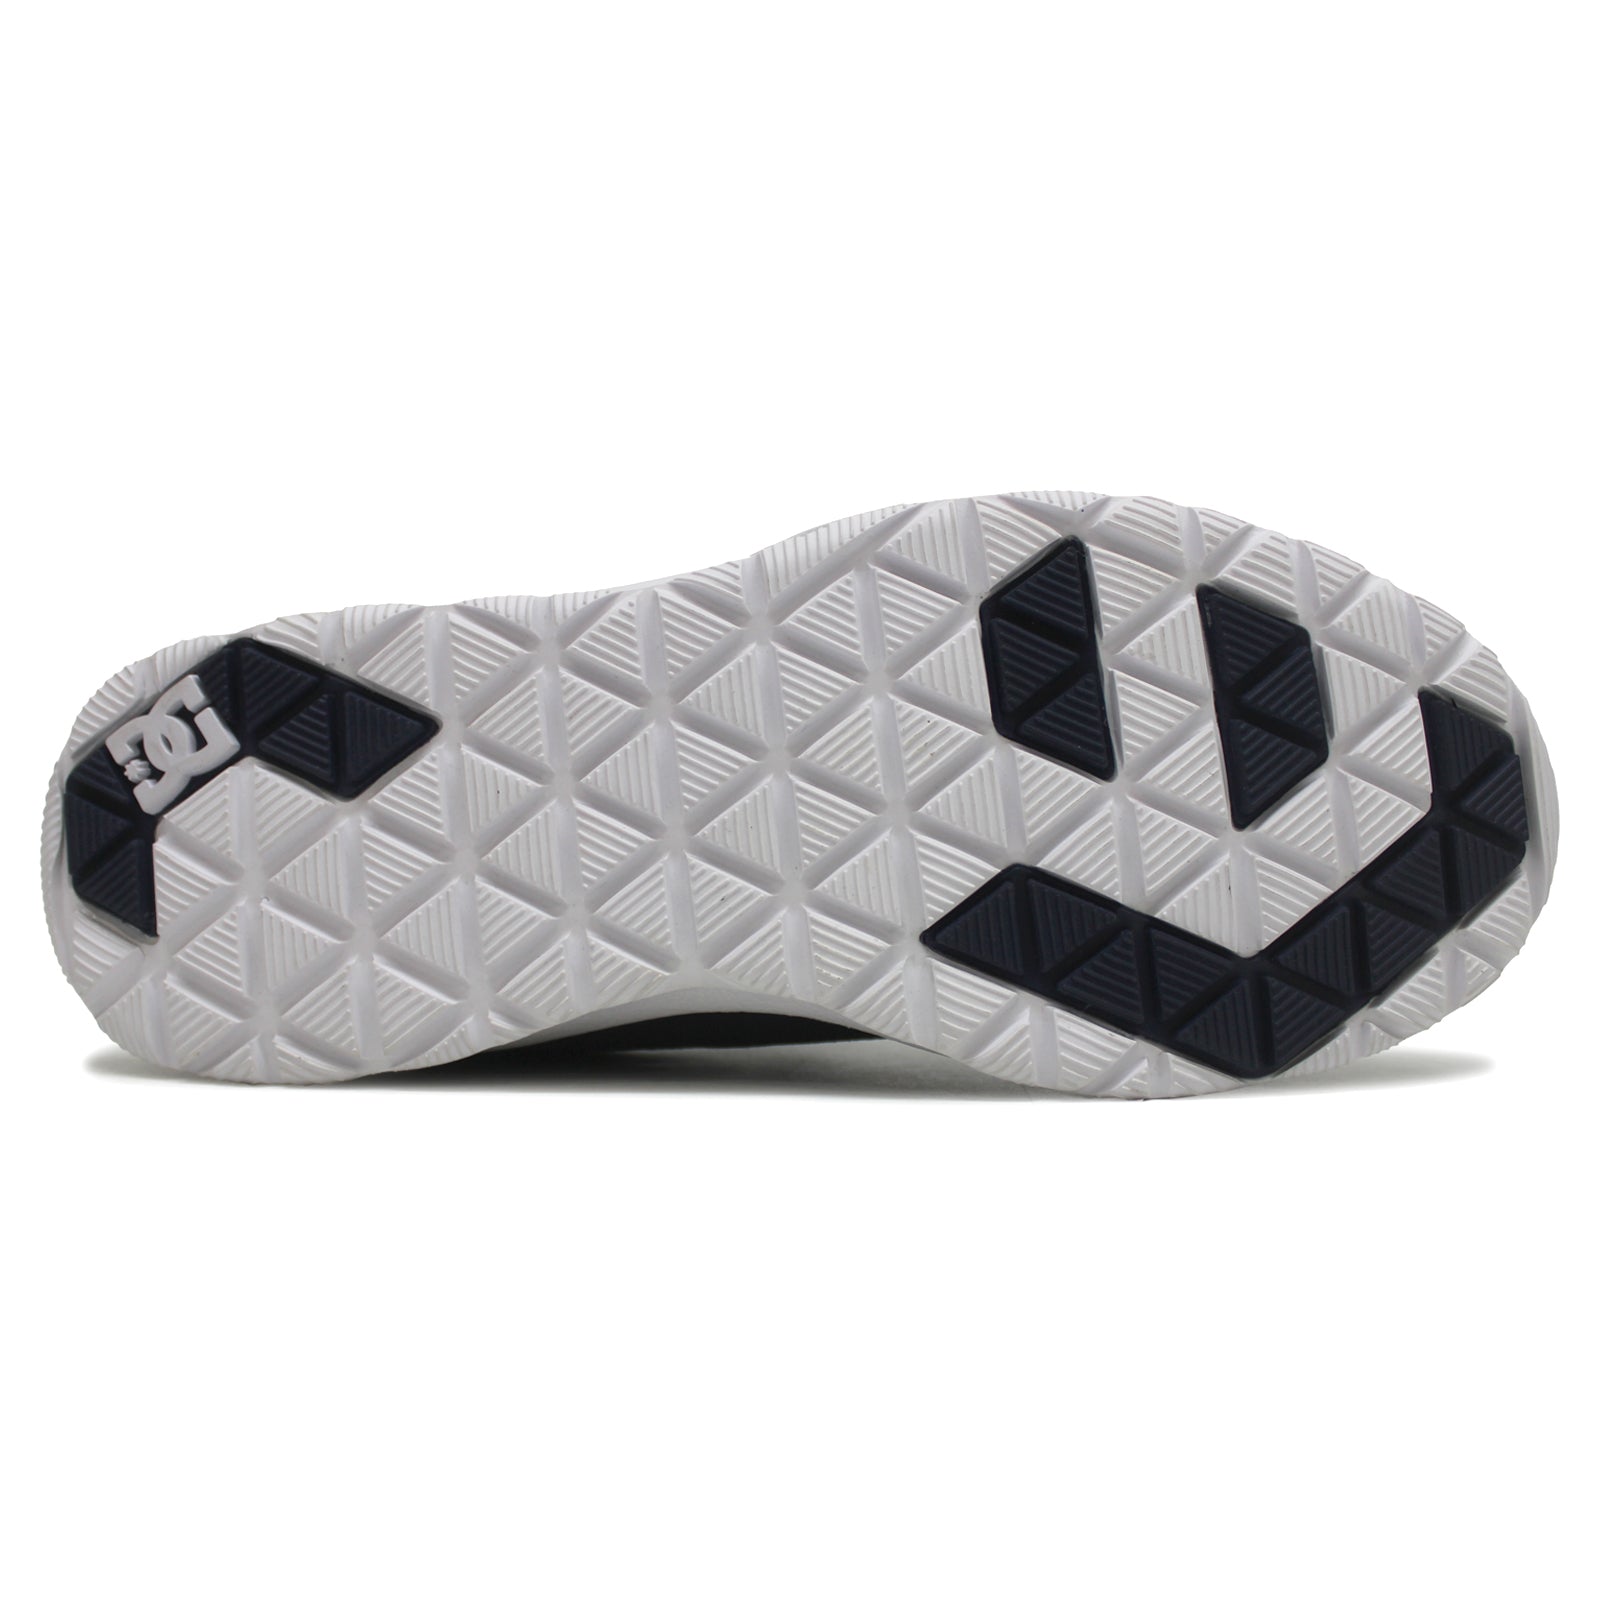 DC Shoes Heathrow ADBS700047-NVY Kids Trainers Blue - UK 5